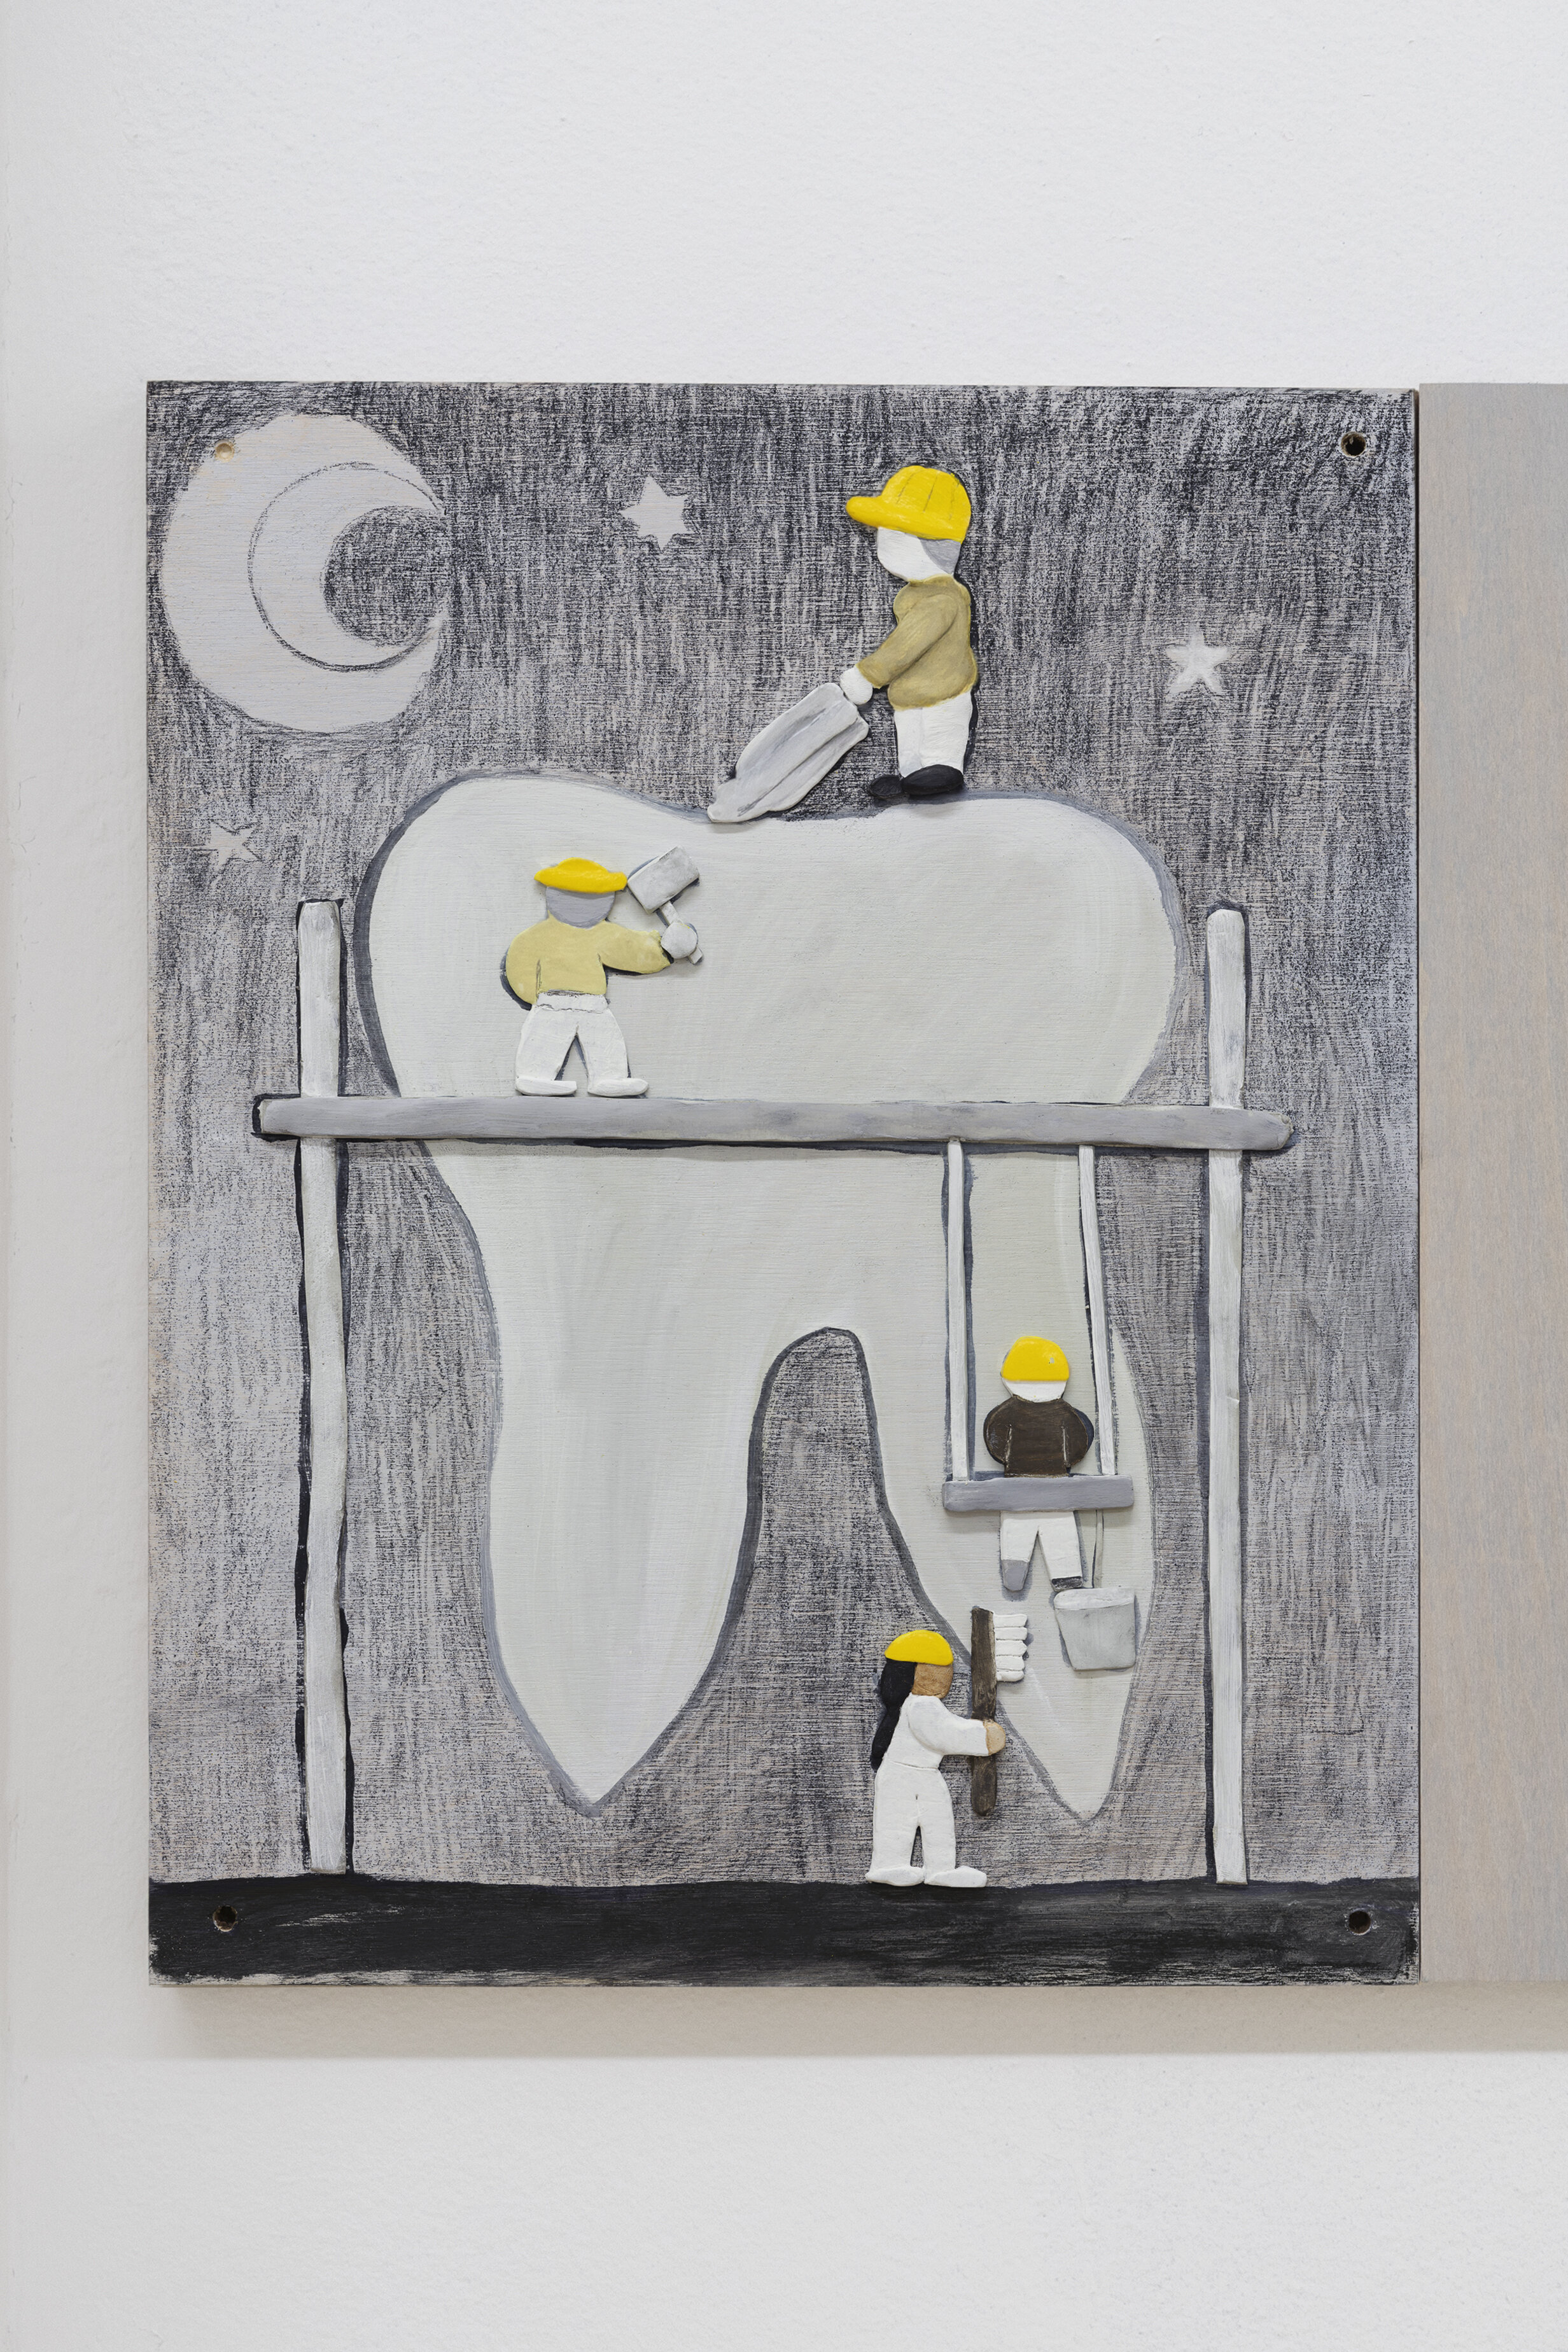  Dennis Witkin  Repairing Tooth,  2020 Oil paint, acrylic paint, cal-tint, wood-stain, charcoal, graphite, epoxy clay, polymer clay on panel 14 x 11 inches 